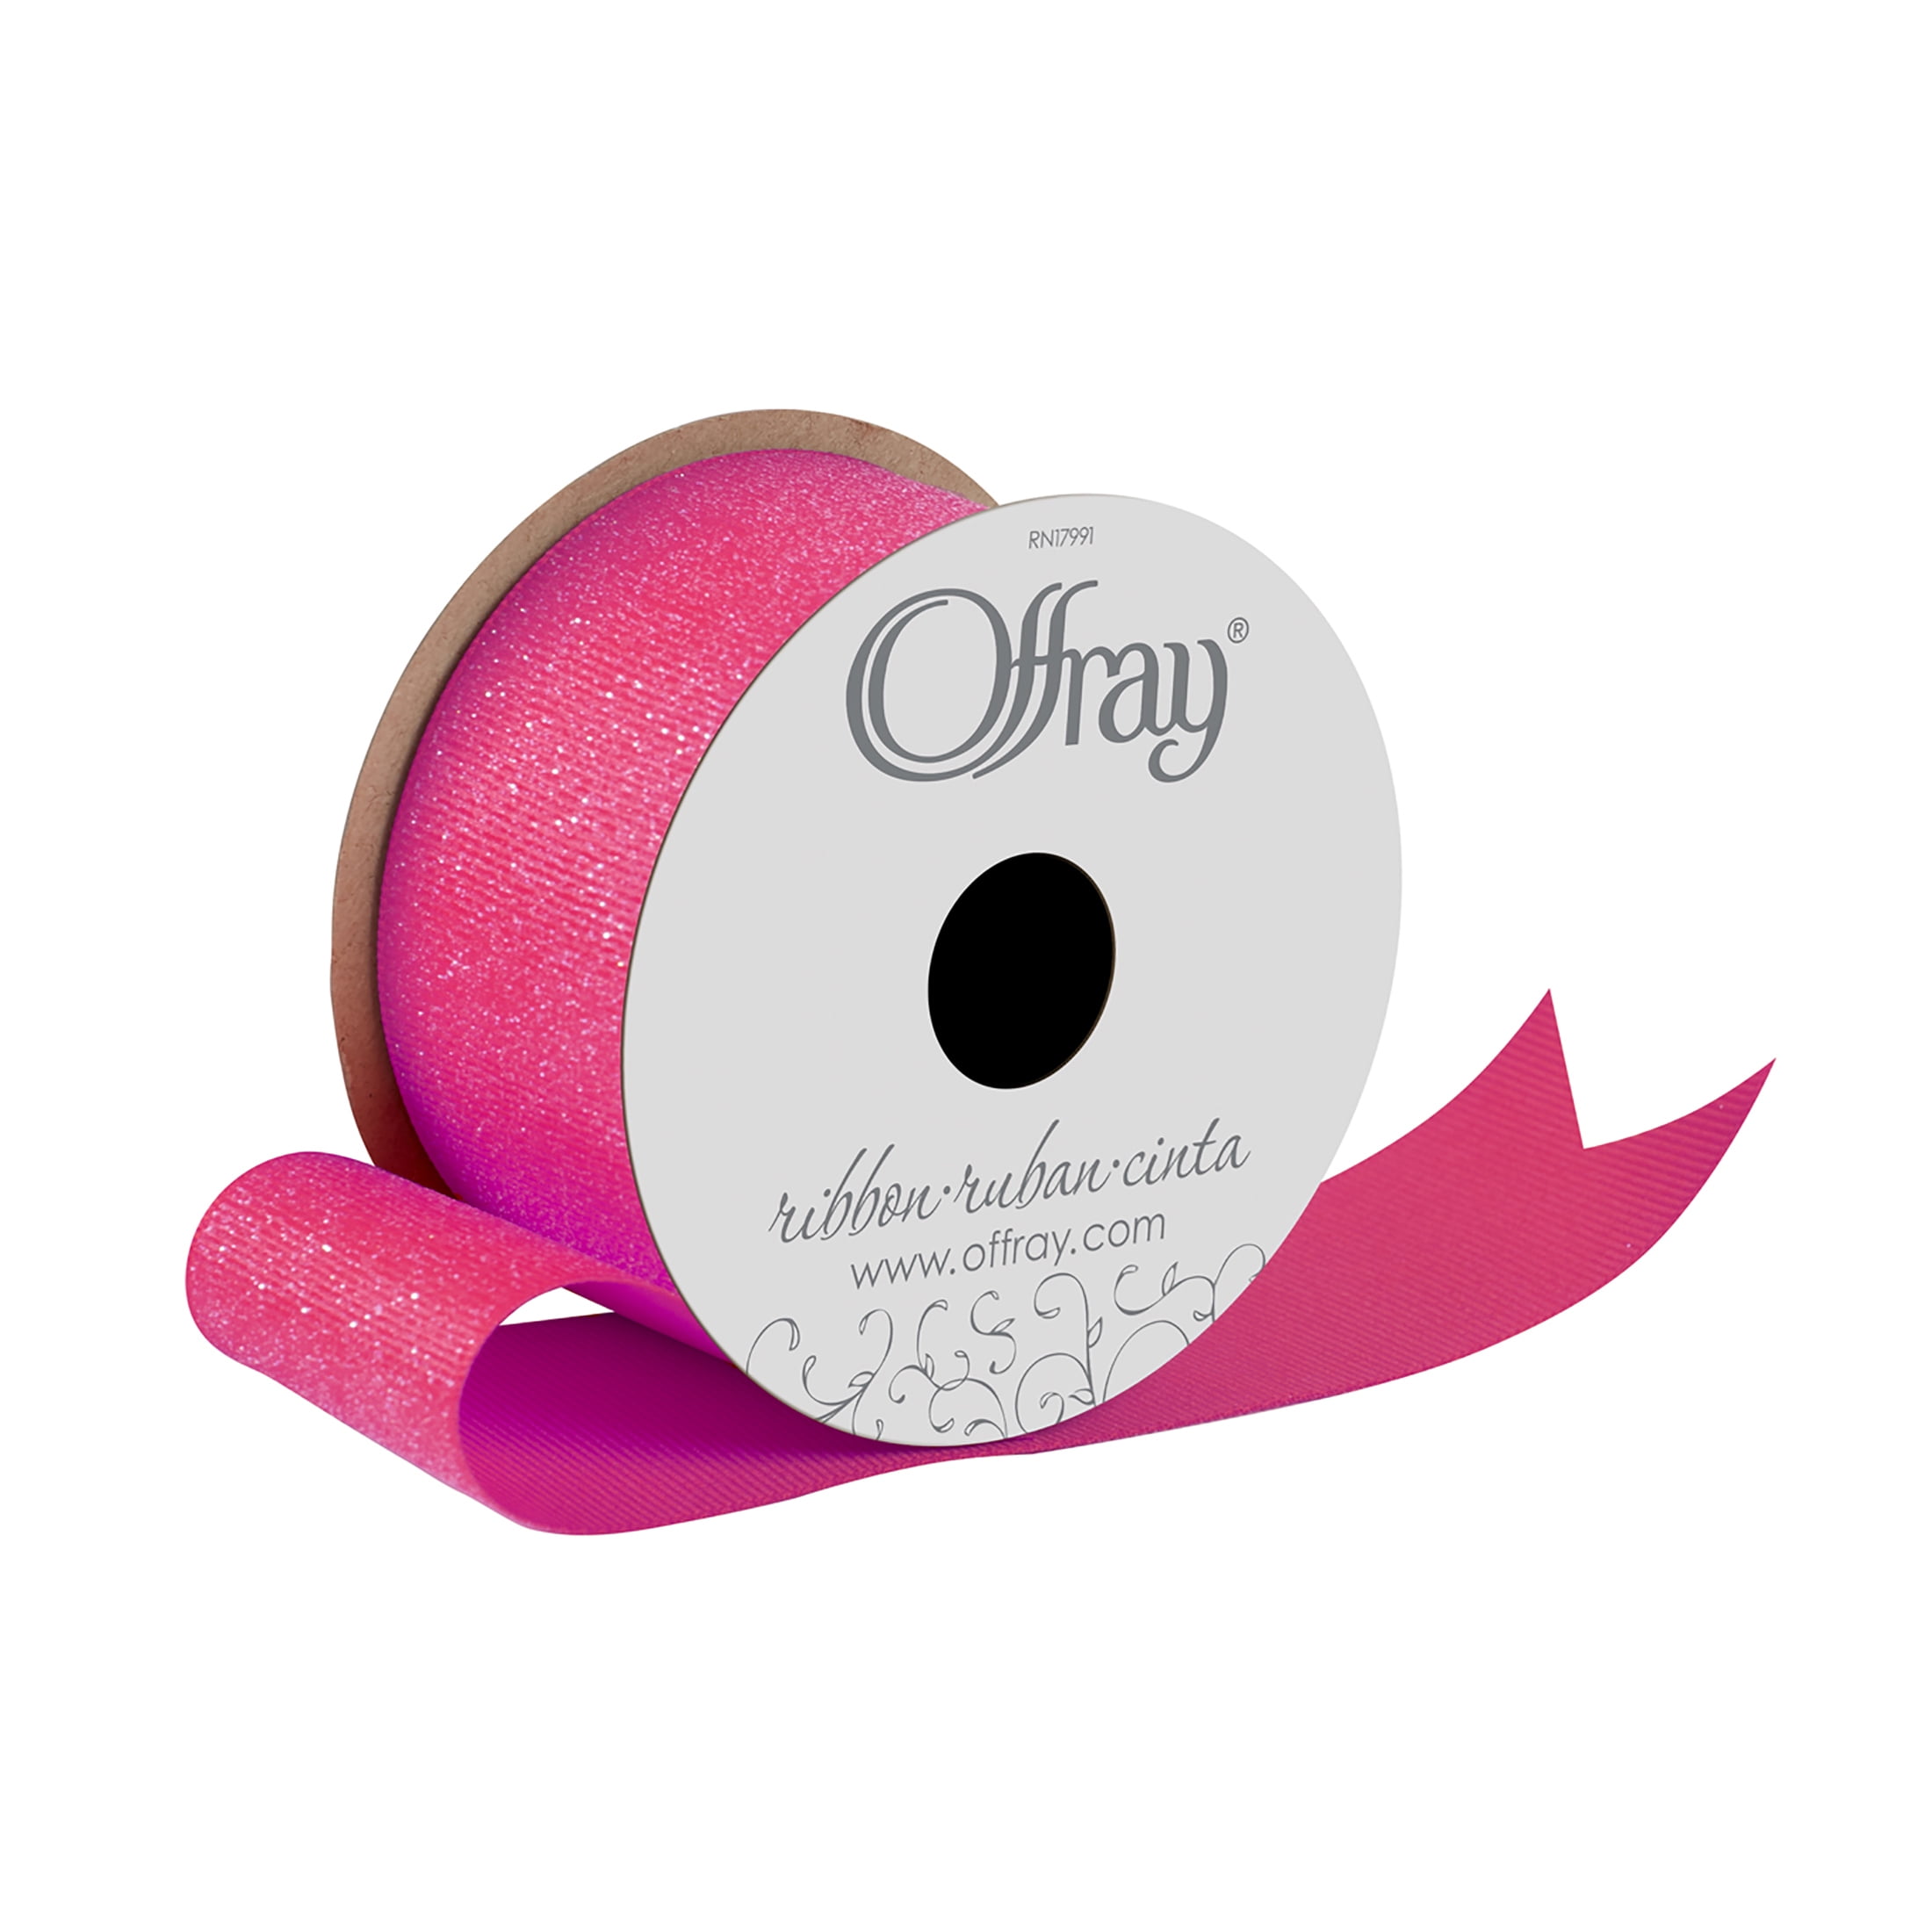 Offray Tulle Craft Ribbon, 6-Inch by 25-Yard Spool, Pink